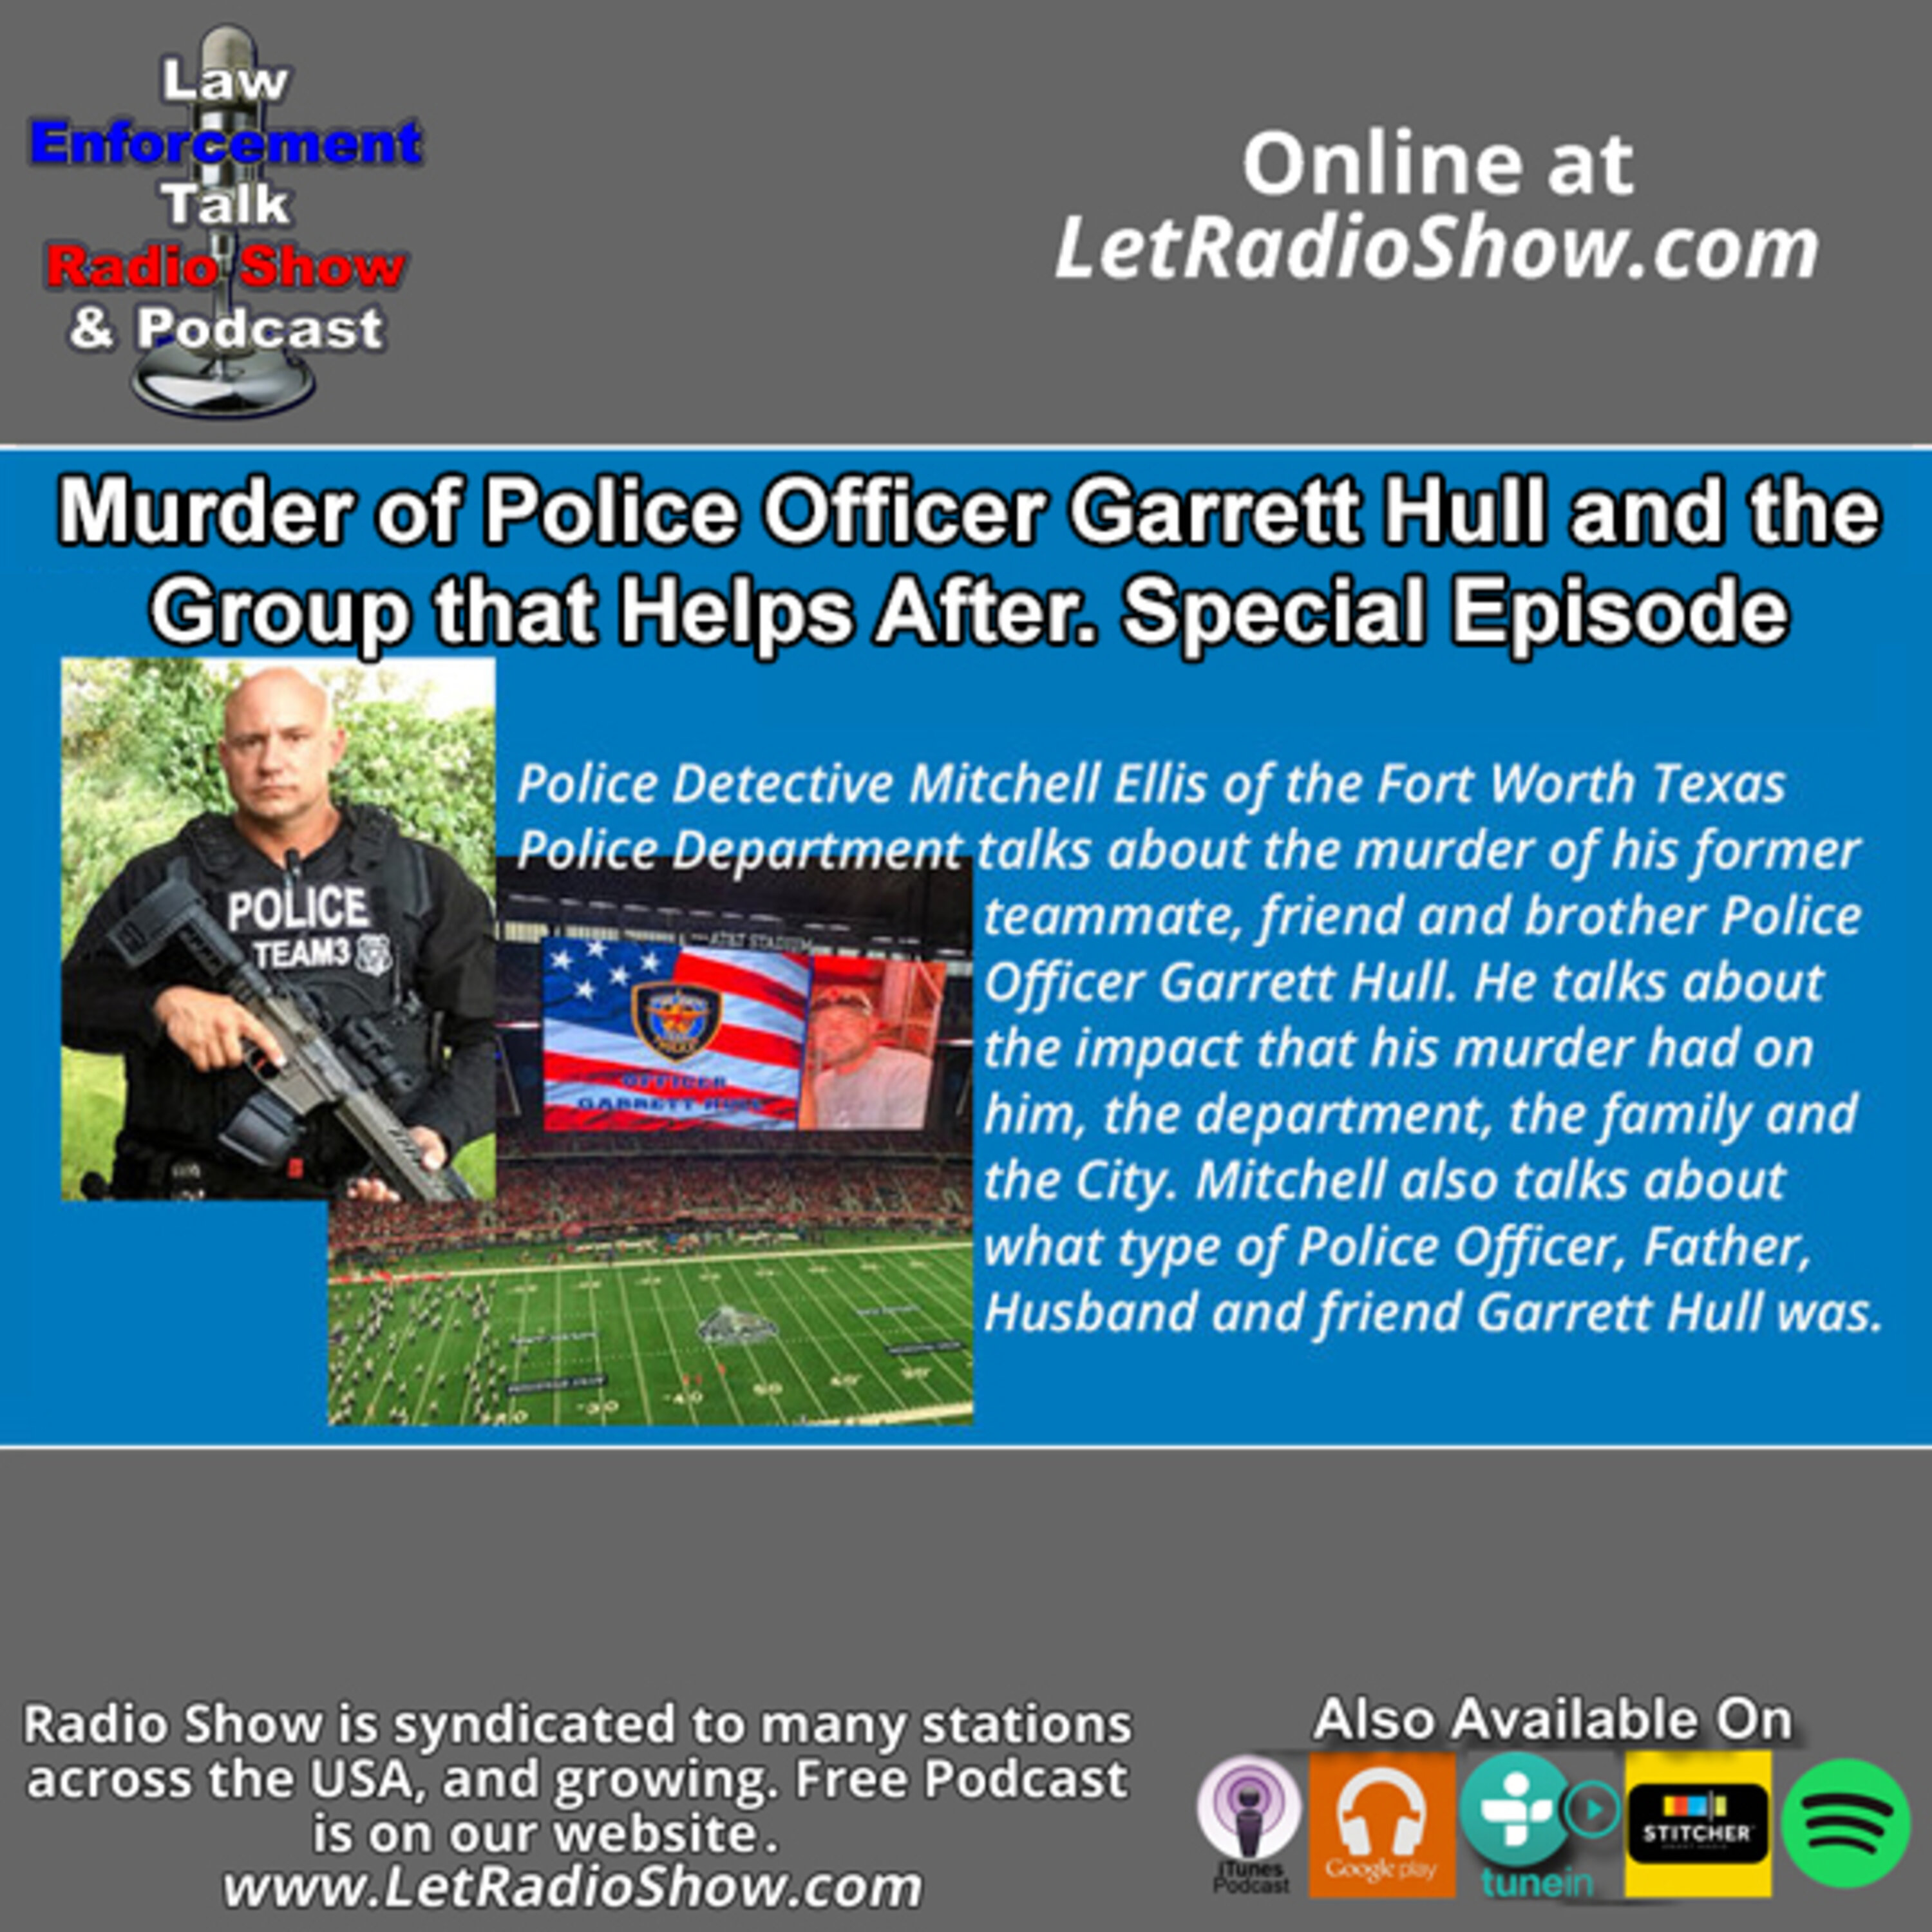 Murder of Police Officer Garrett Hull and the Group that Helps After. Special Episode.